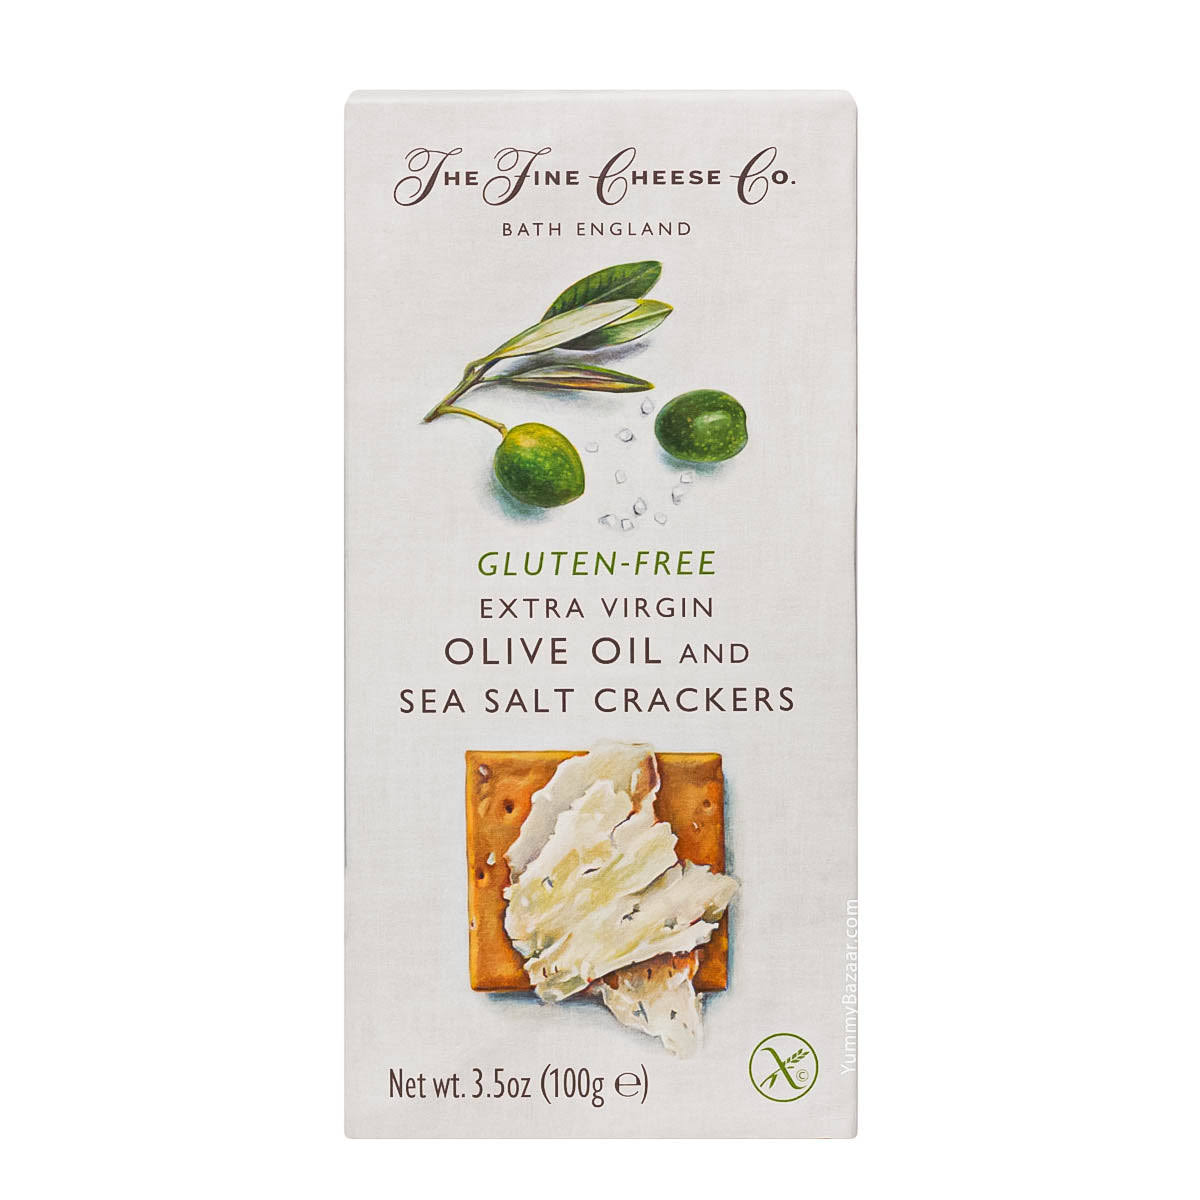 The Fine Cheese Co. Gluten-Free Extra Virgin Olive Oil & Sea Salt Crackers - 3.5 oz